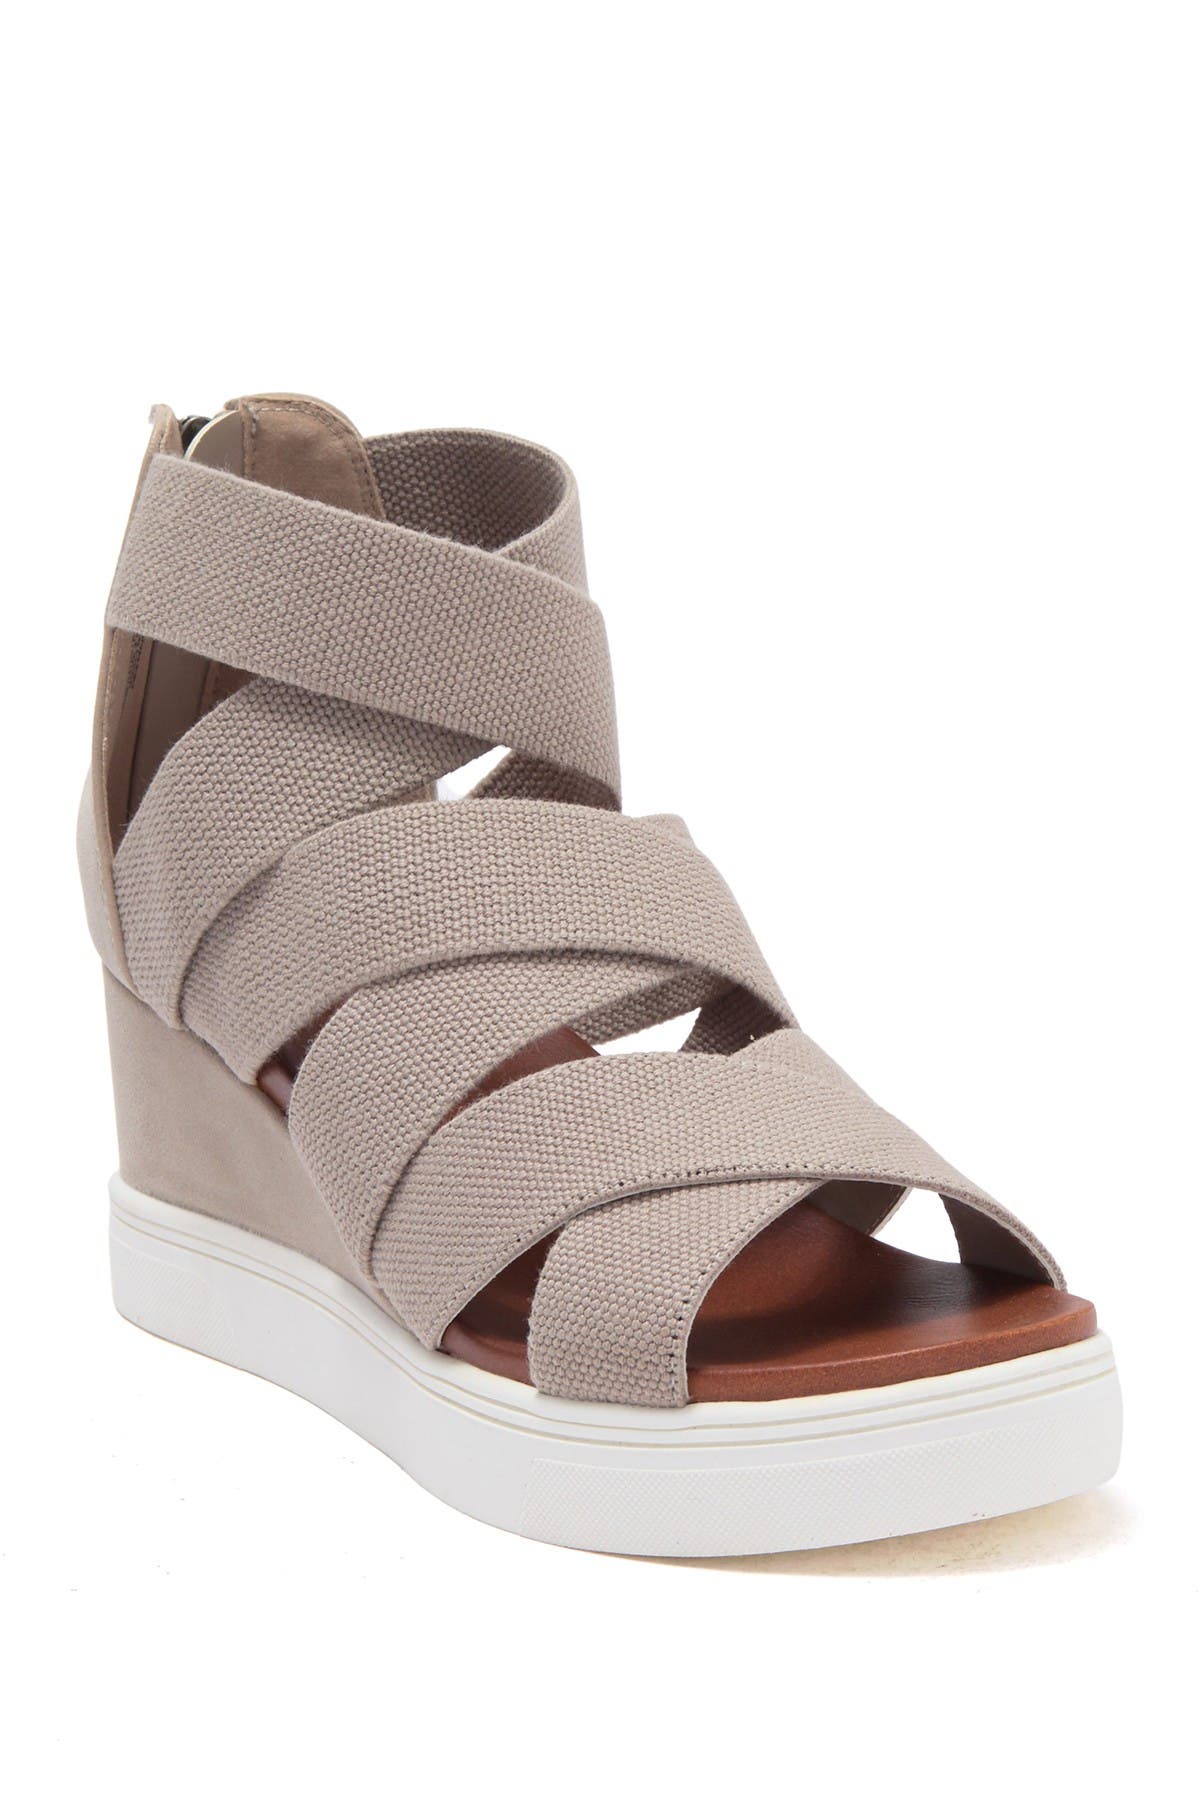 Mia Valery Strappy Wedge Heel High Top Sneaker In Cement/cement